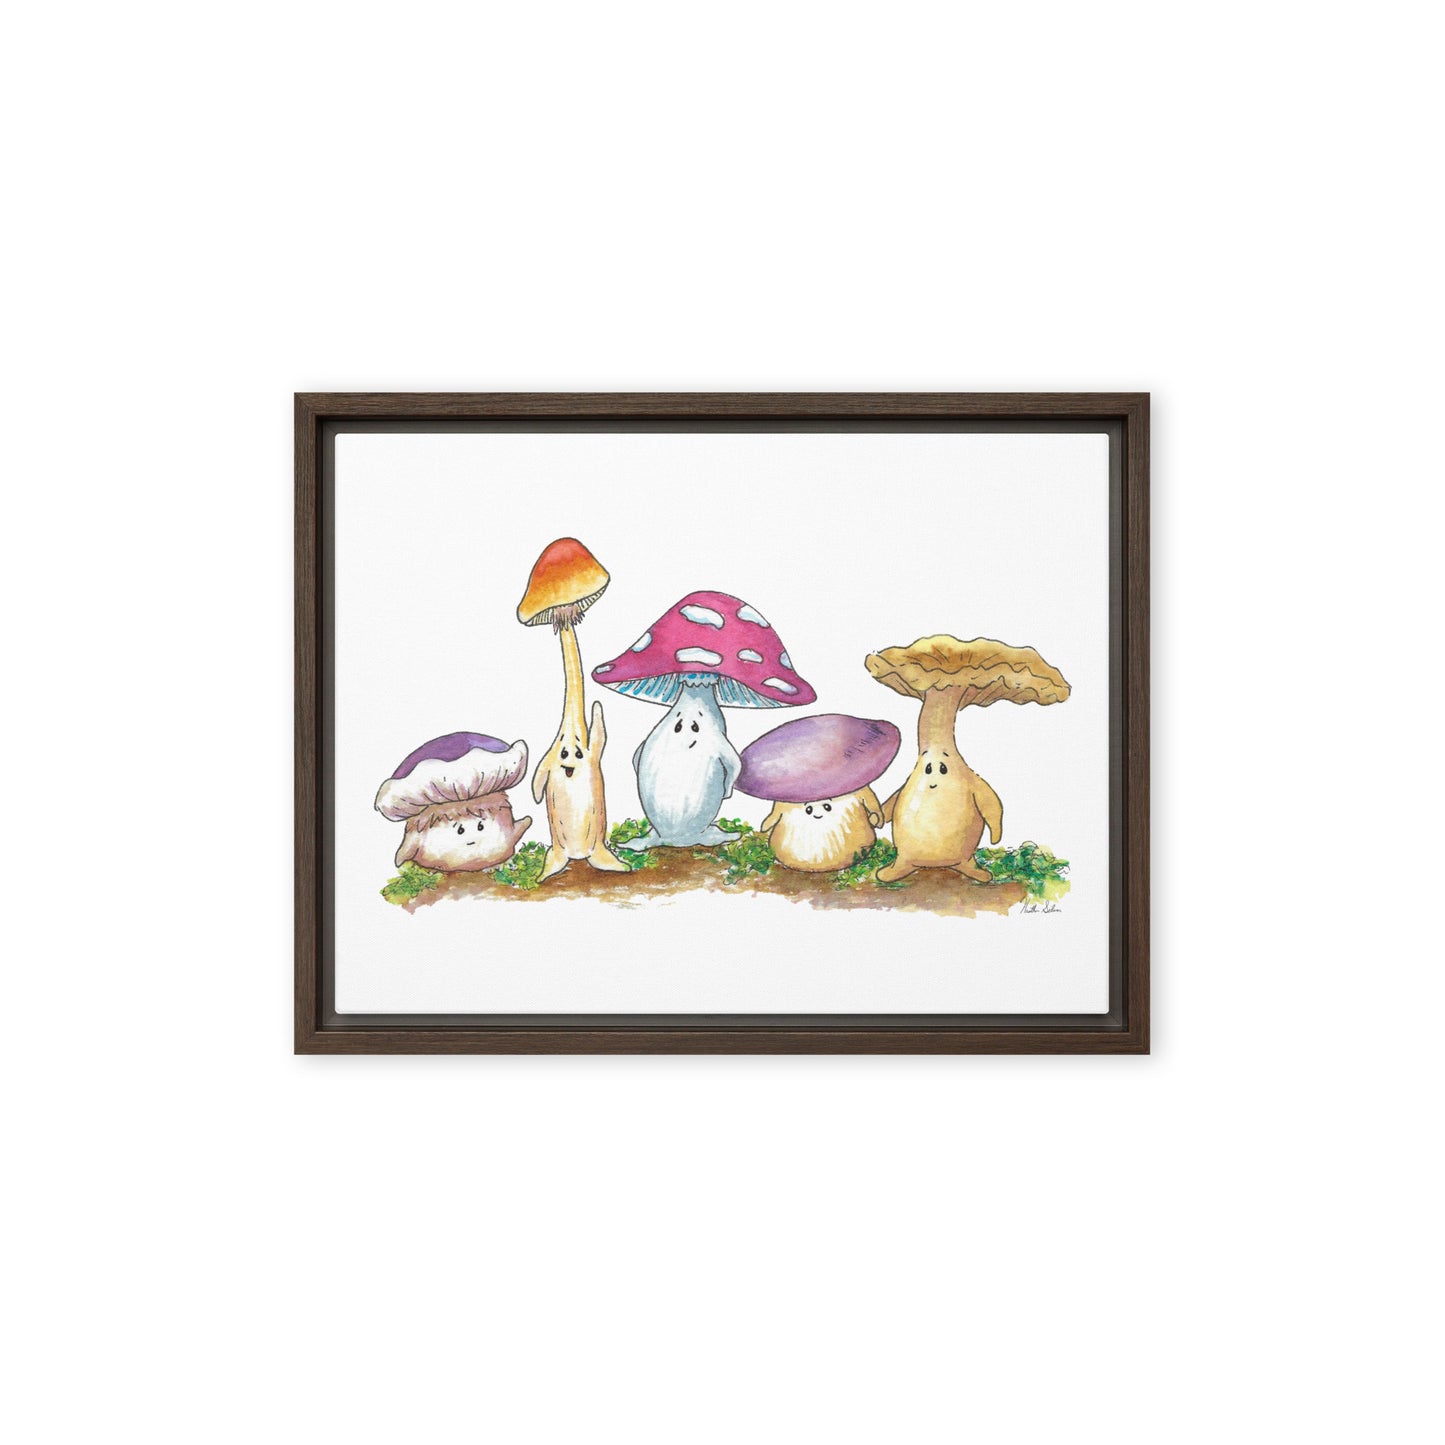 9 by 12 inch canvas print of Heather Silver's watercolor painting, Mushy and Friends. Framed in a dark brown pine wood frame that gives it a floating canvas effect.